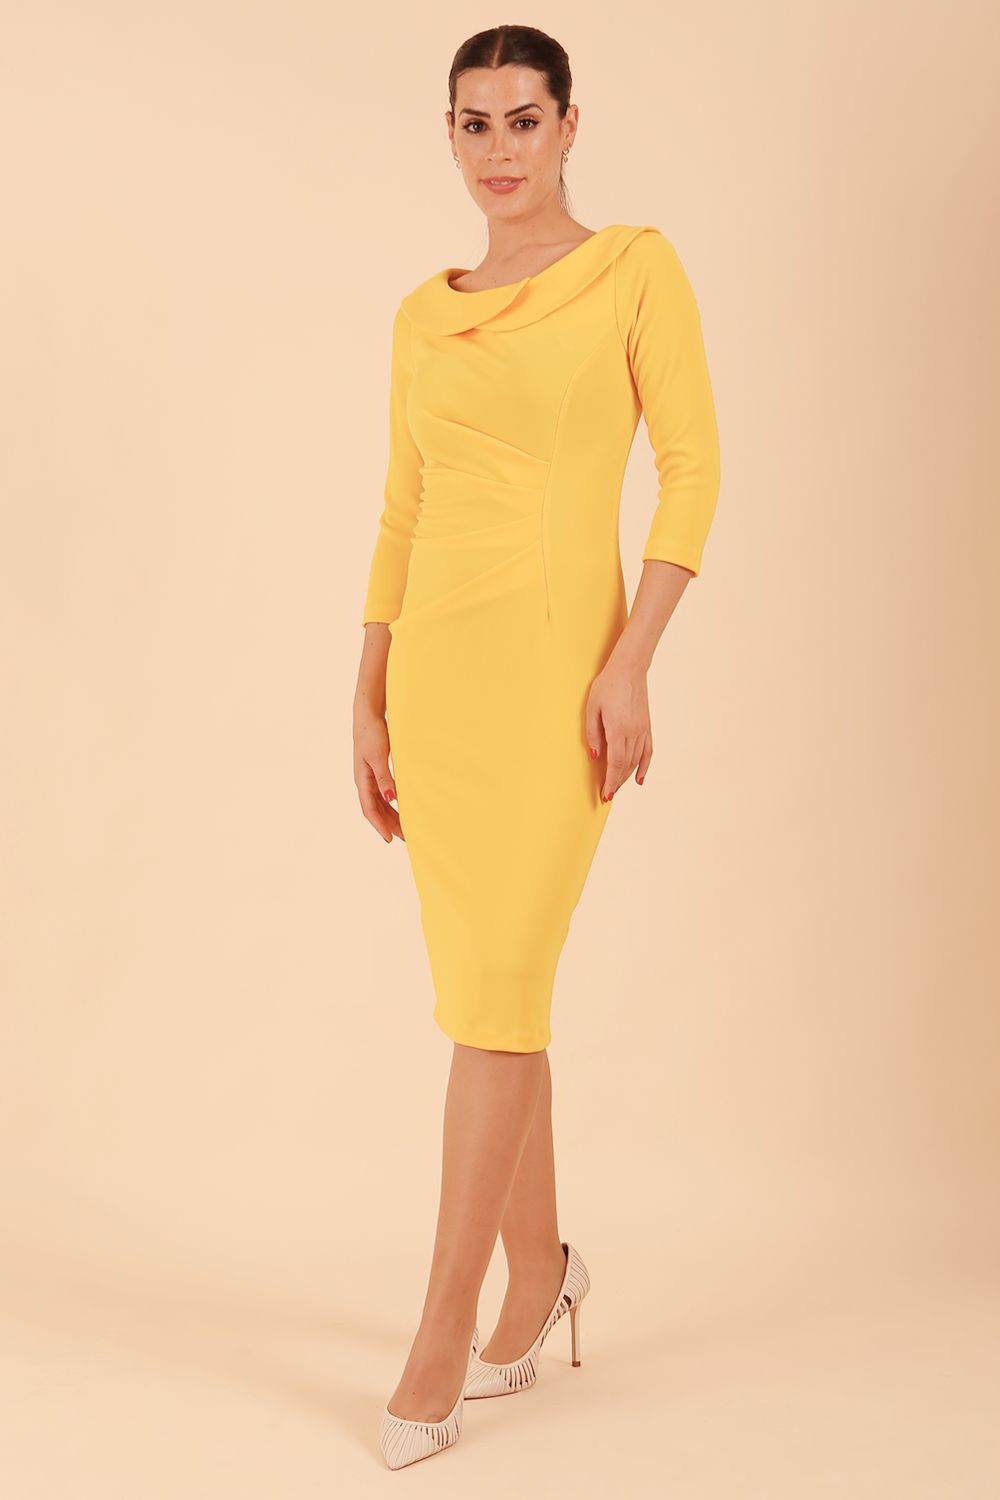 Model wearing diva catwalk Monique 3/4 Sleeve Pencil Dress with Overlapping Folded  Round Neckline and 3/4 sleeves and knee length in Sunshine Yellow front